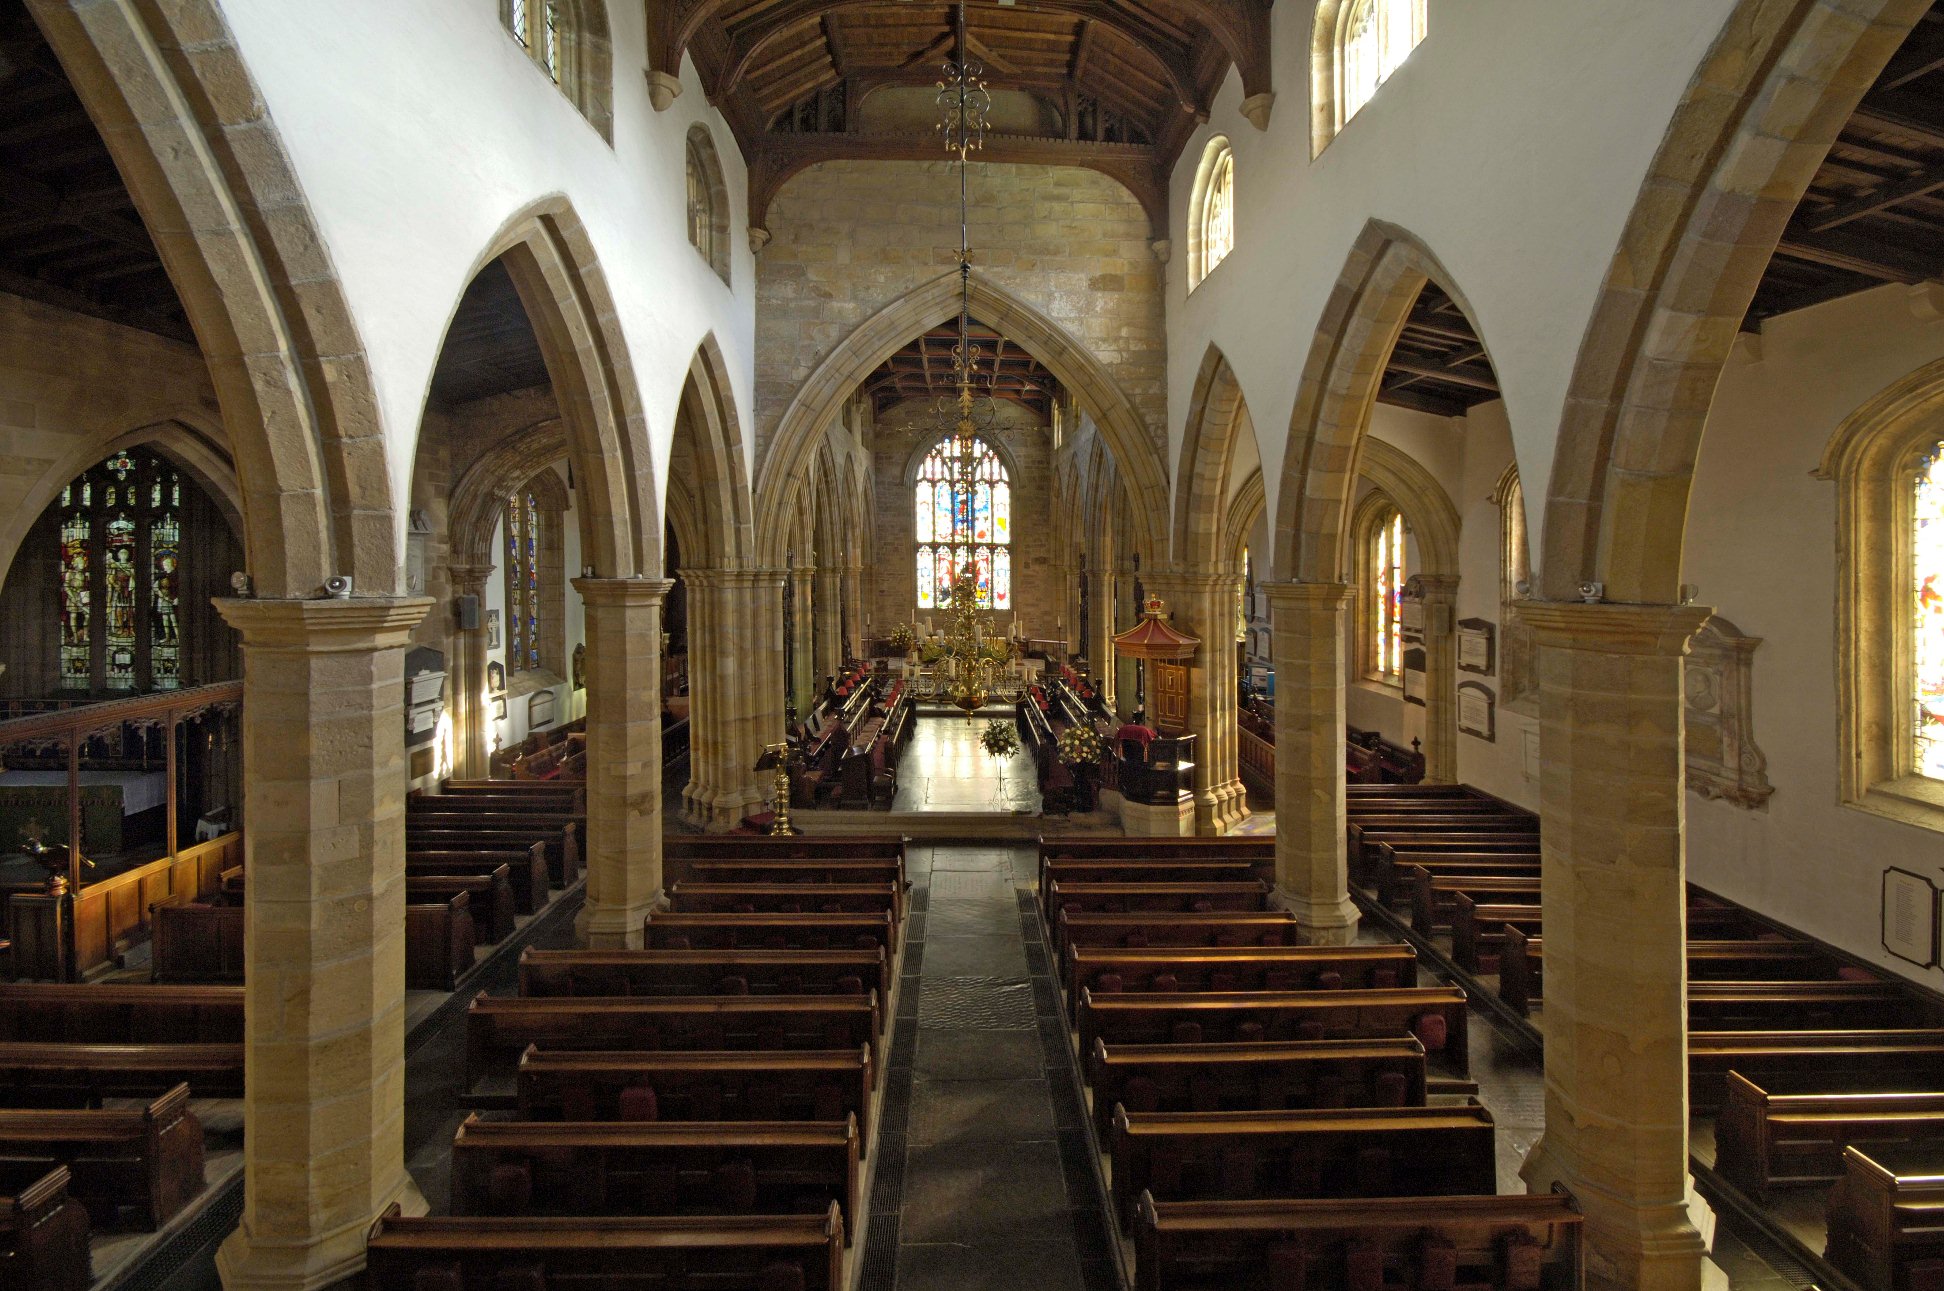 Interior of priory church, Lancaster, Lancashire showing arches of the 14th century aisle arcades